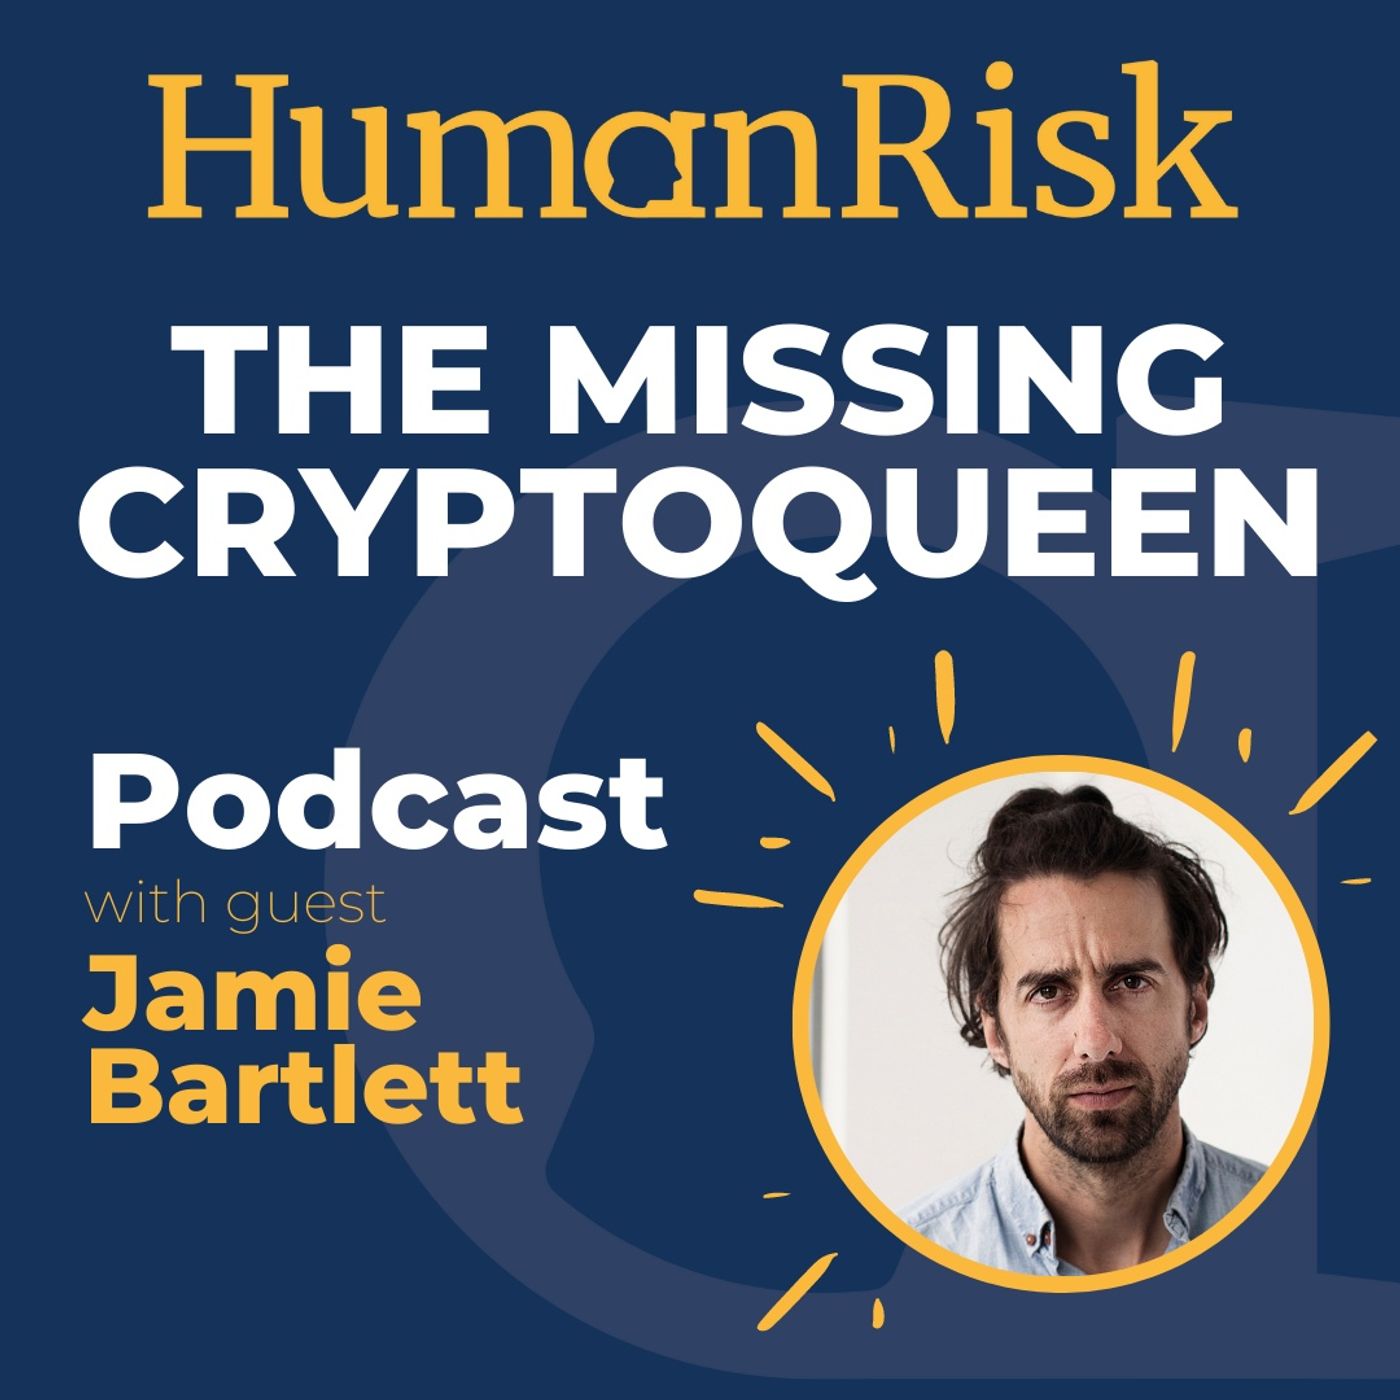 Jamie Bartlett on The Missing Cryptoqueen Image